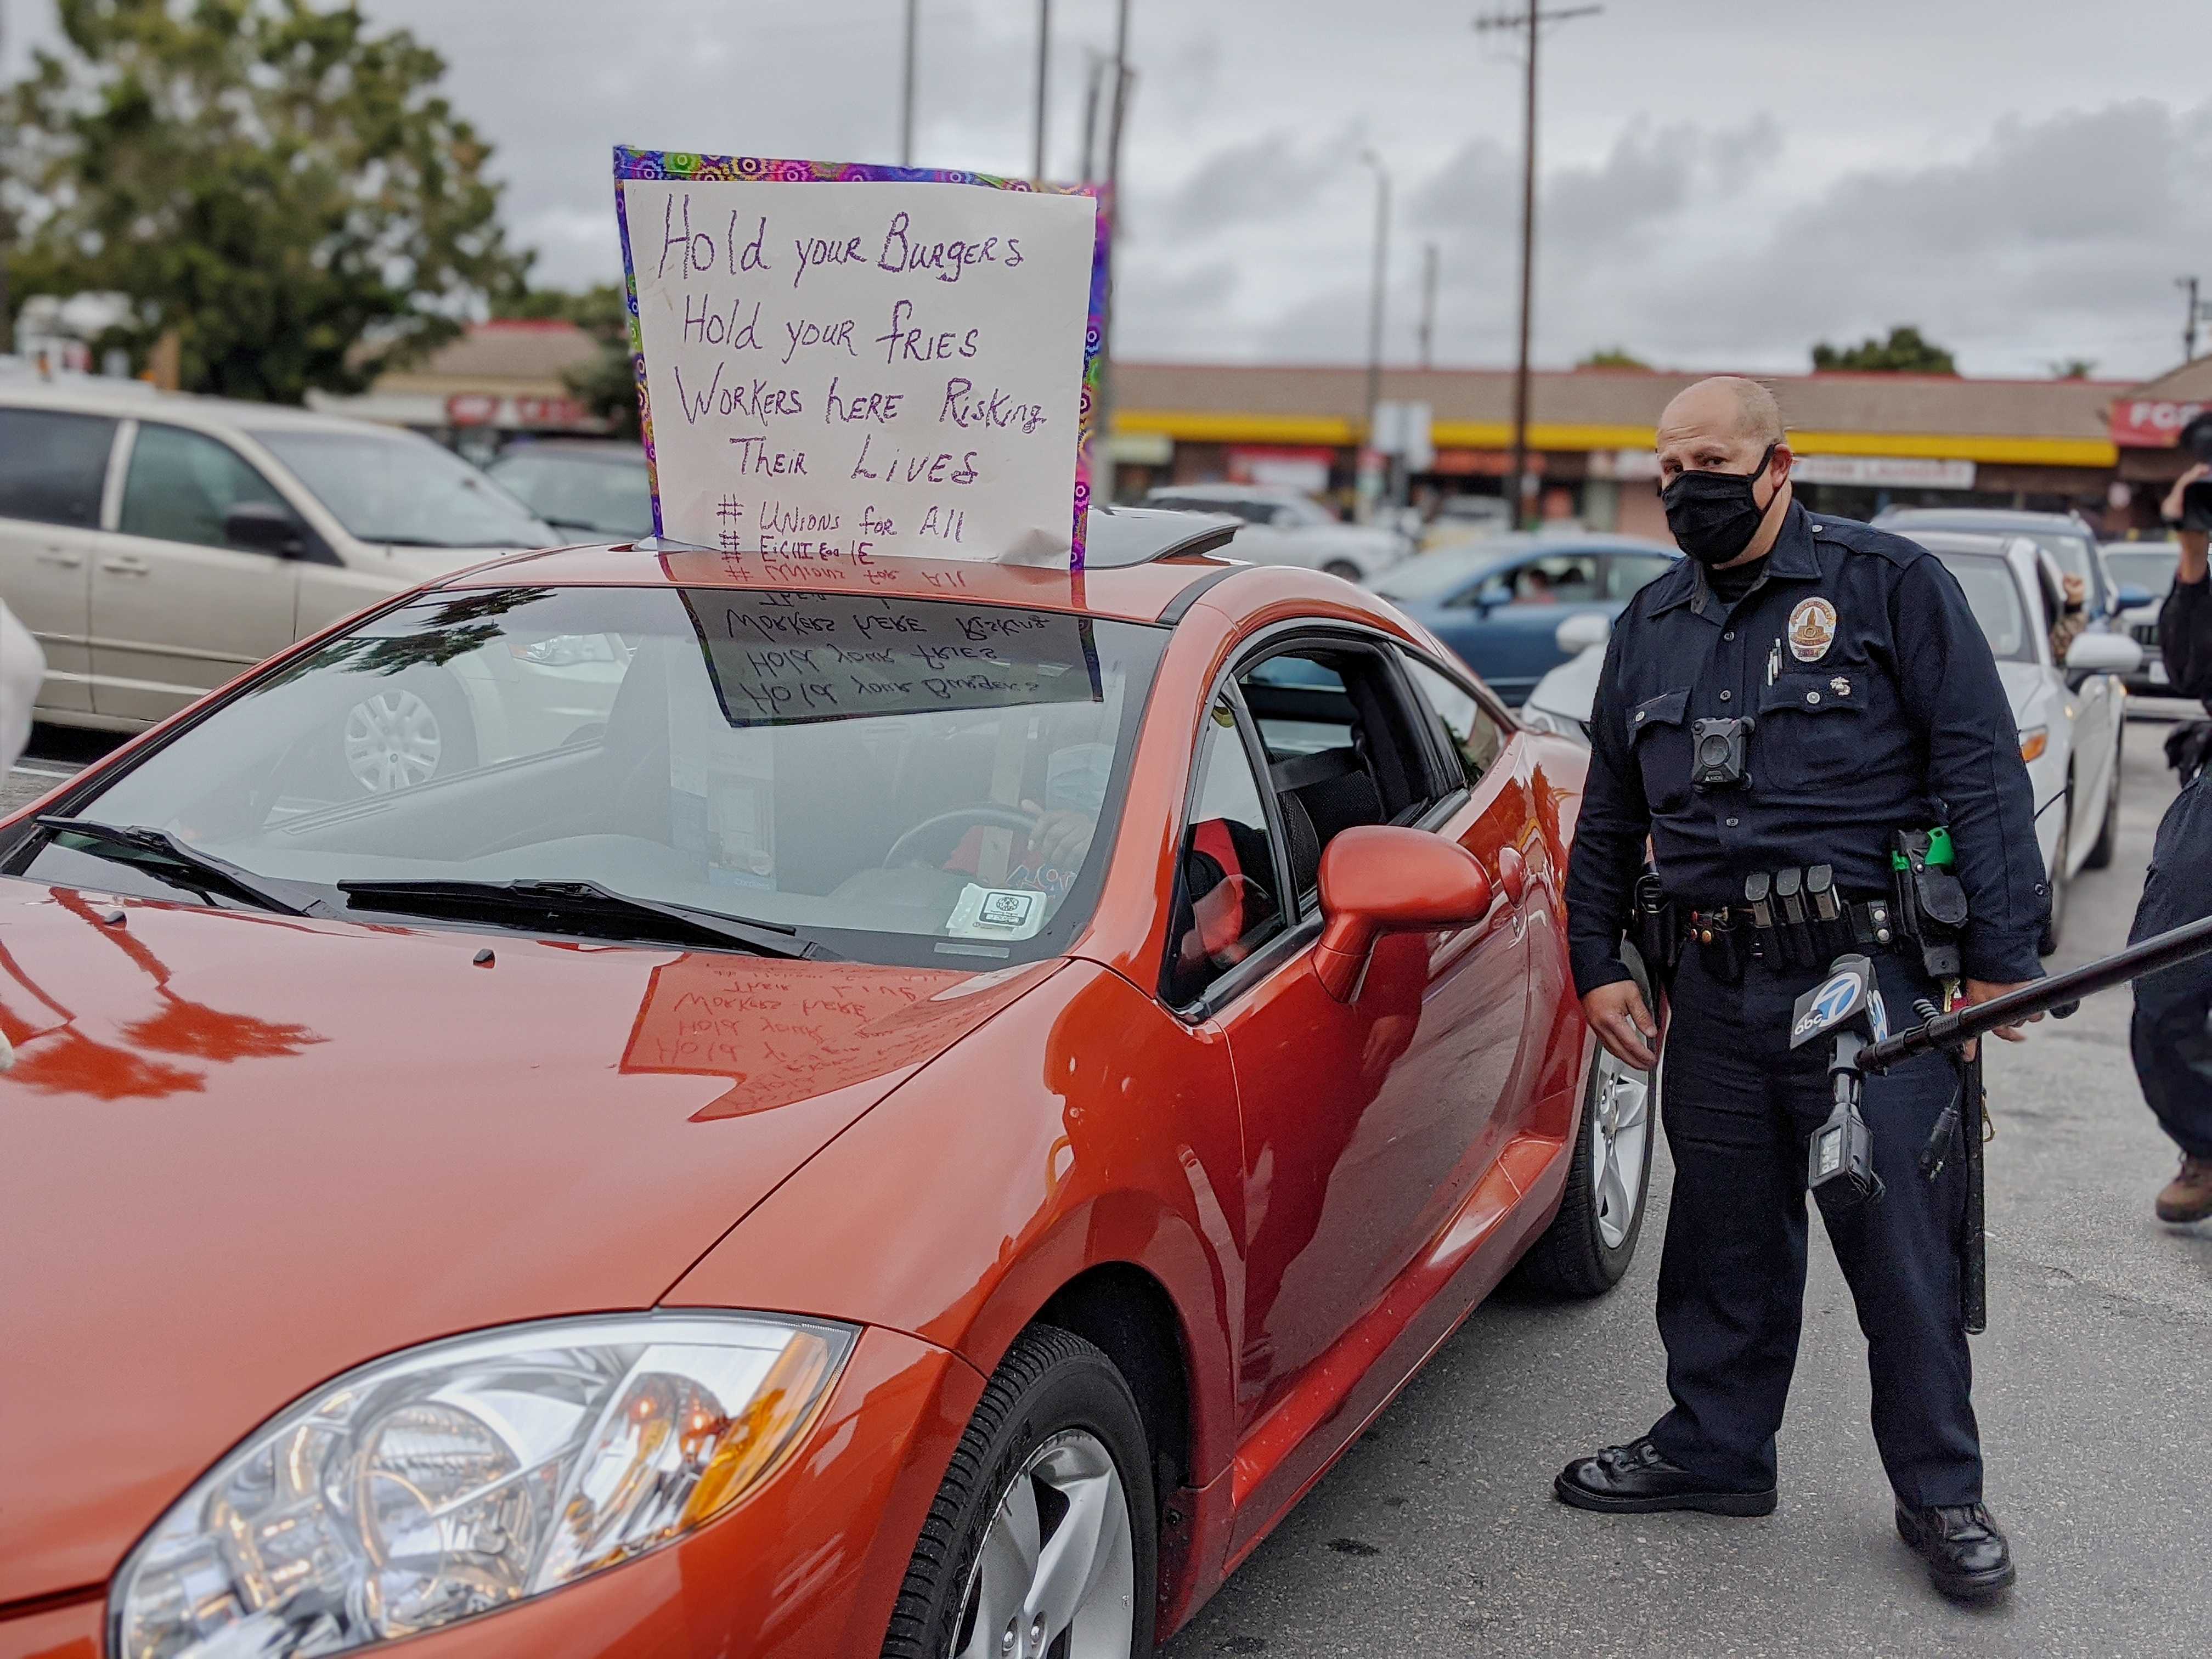 Police attempt to break up protest at South LA McDonald’s on April 6, 2020